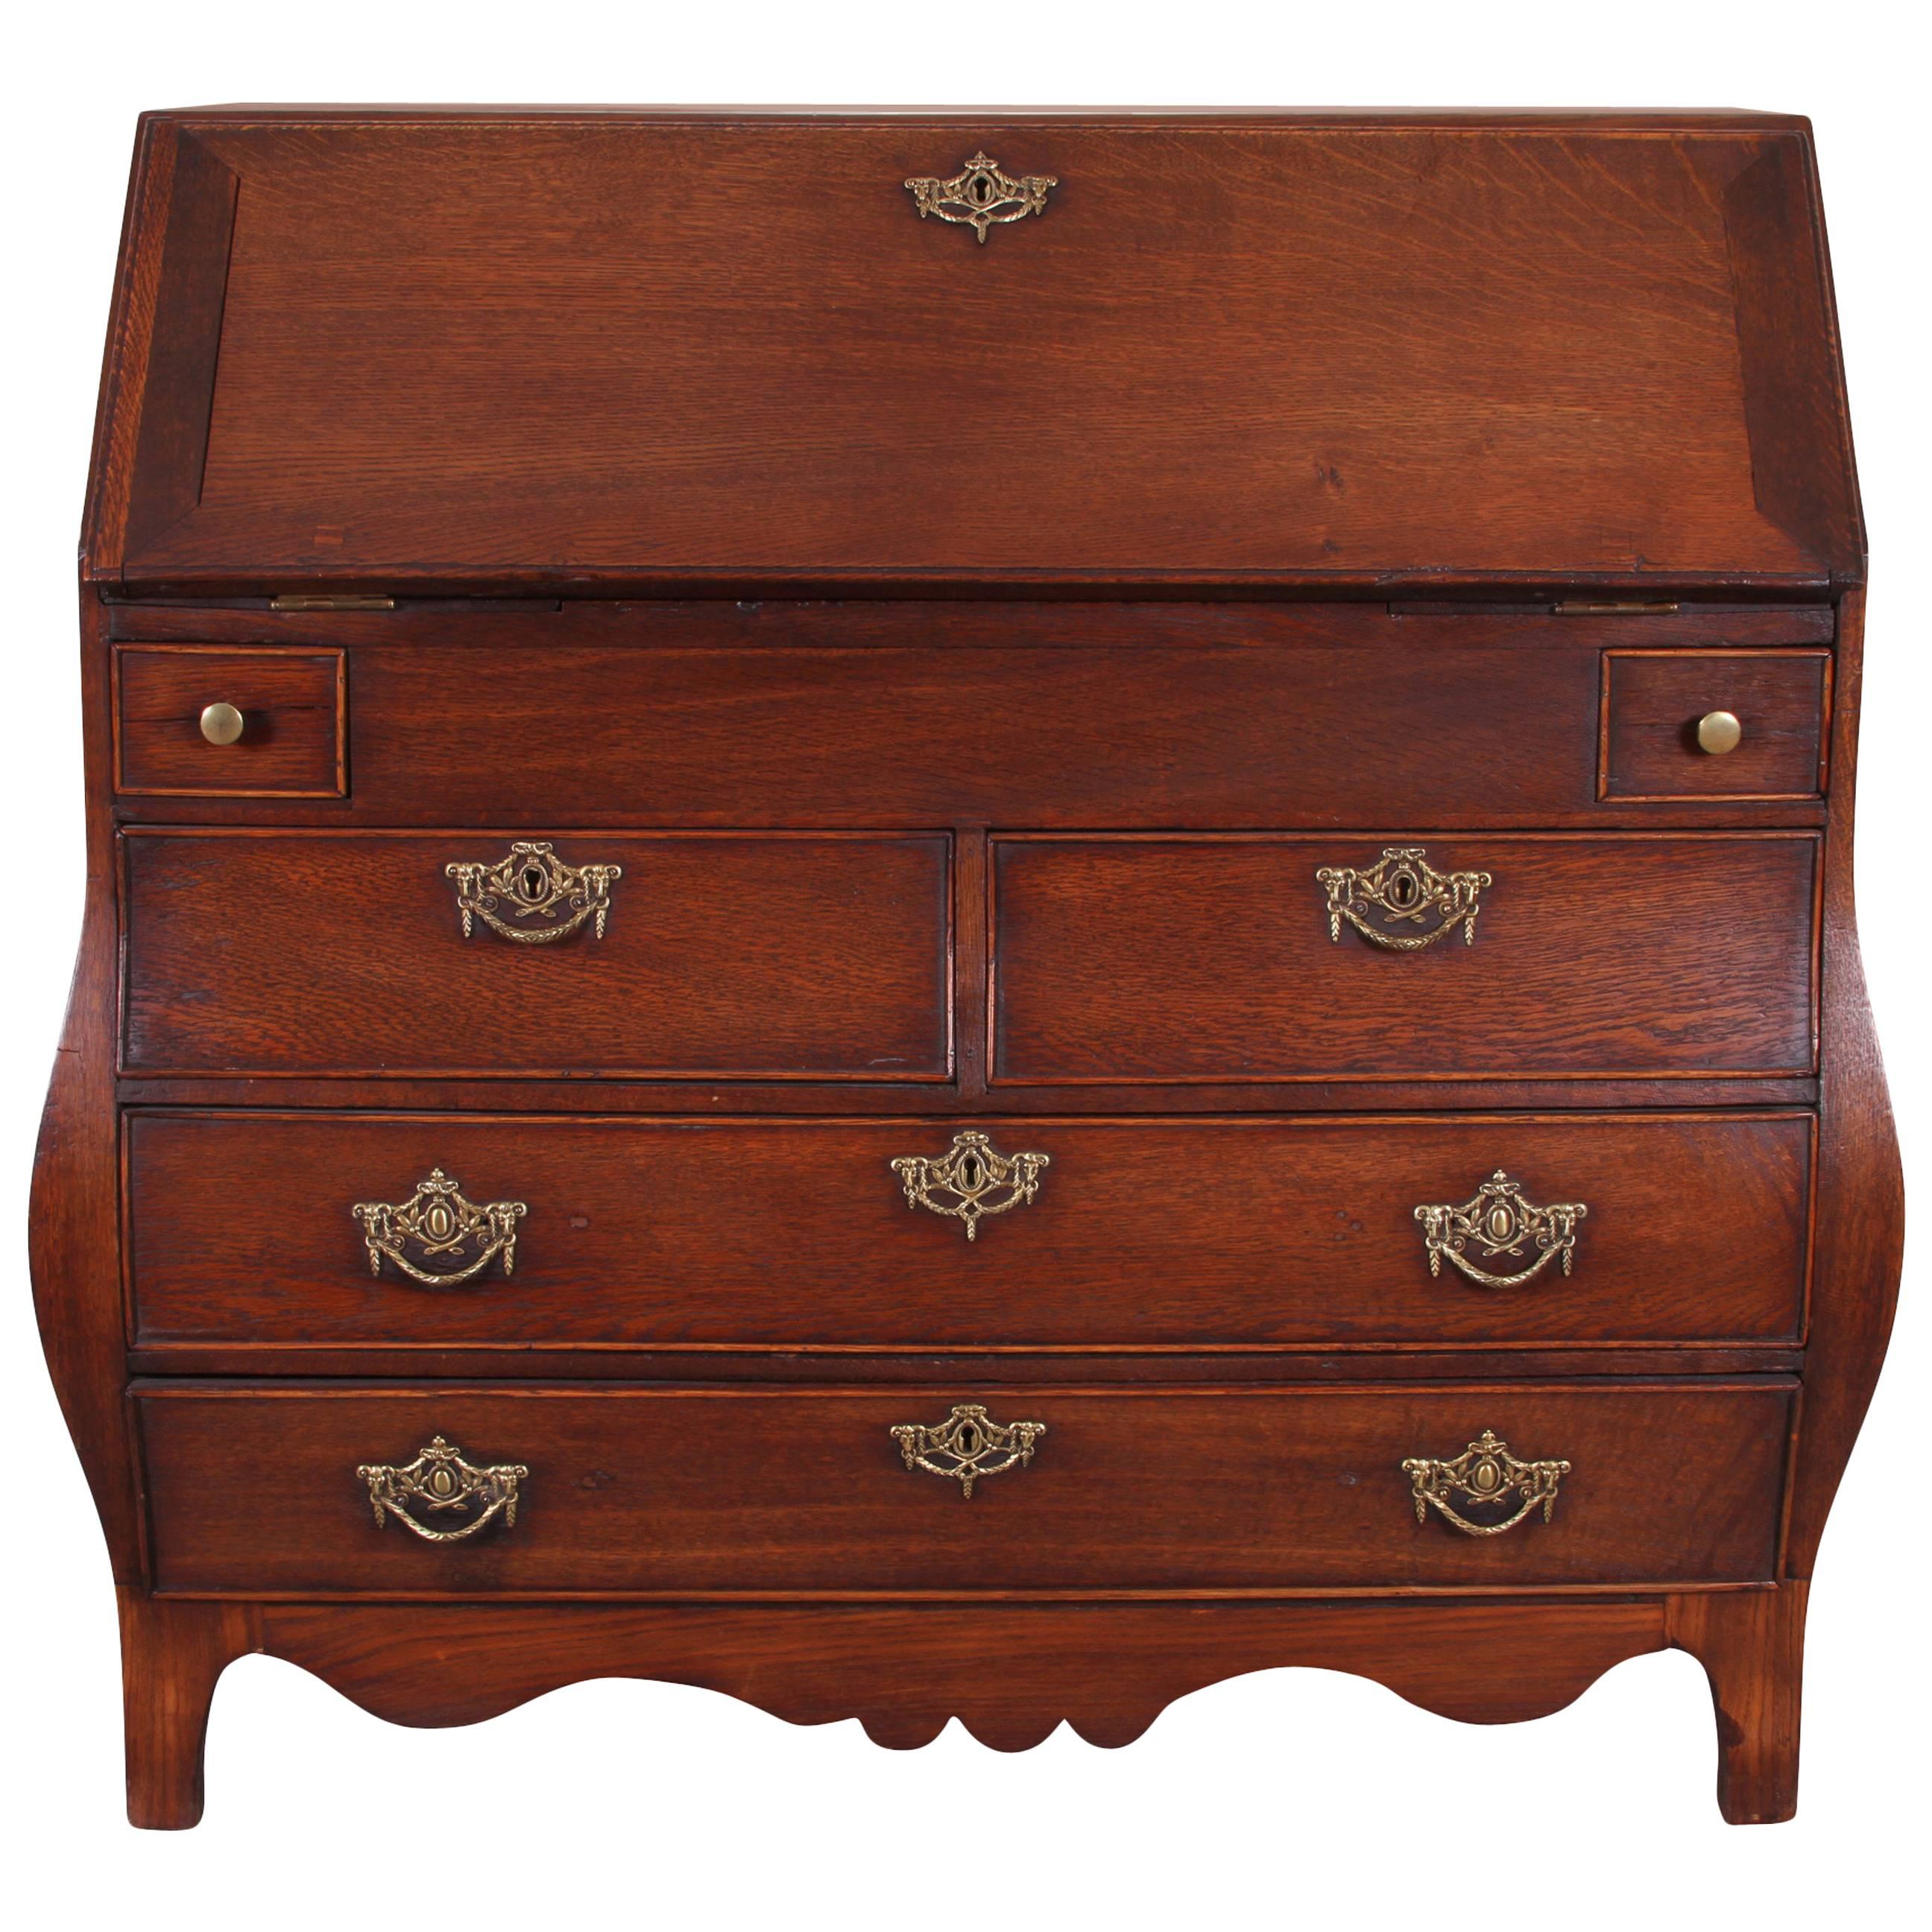 Late 18th-Early 19th Century Dutch Slant Front Bombe Writing Desk